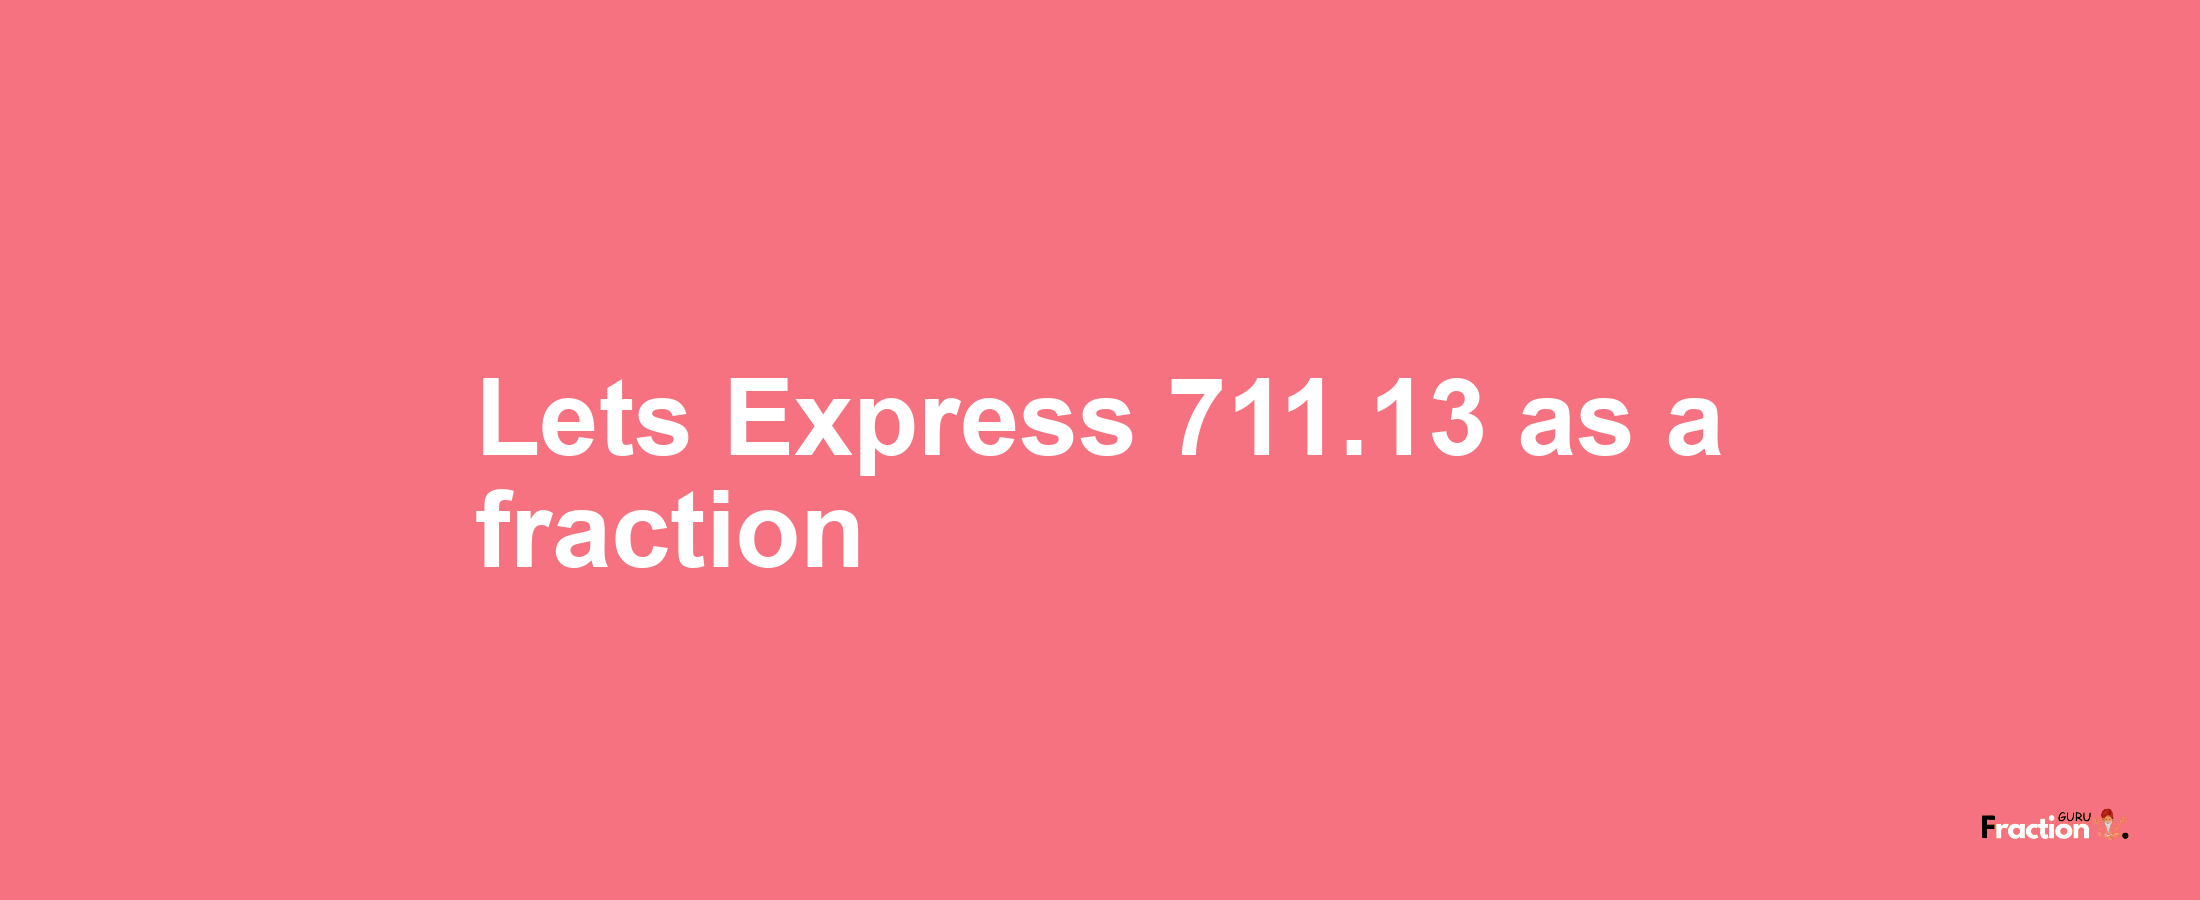 Lets Express 711.13 as afraction